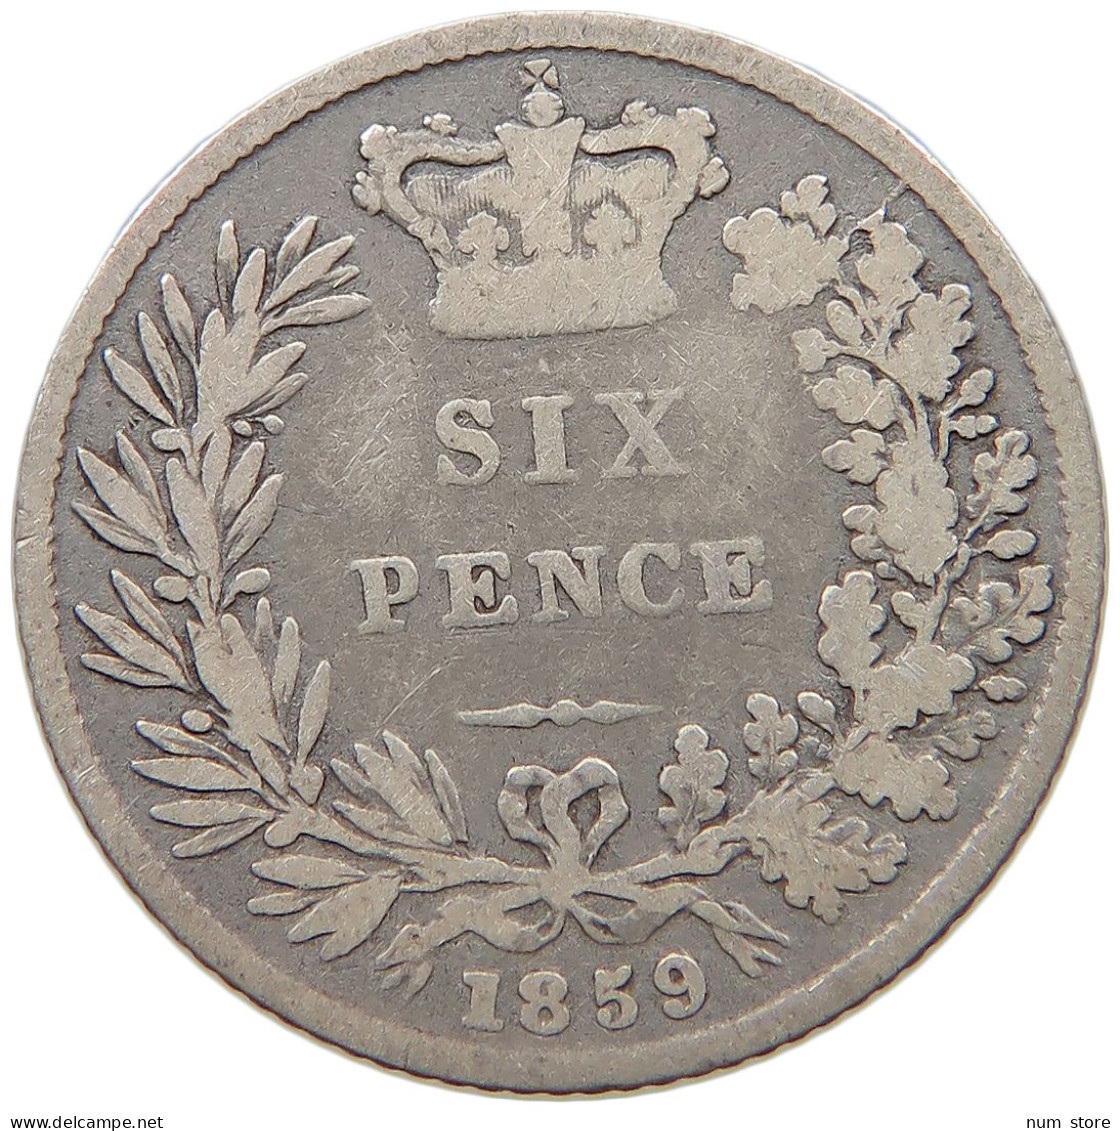 GREAT BRITAIN SIXPENCE 1859 Victoria 1837-1901 #a033 0621 - H. 6 Pence